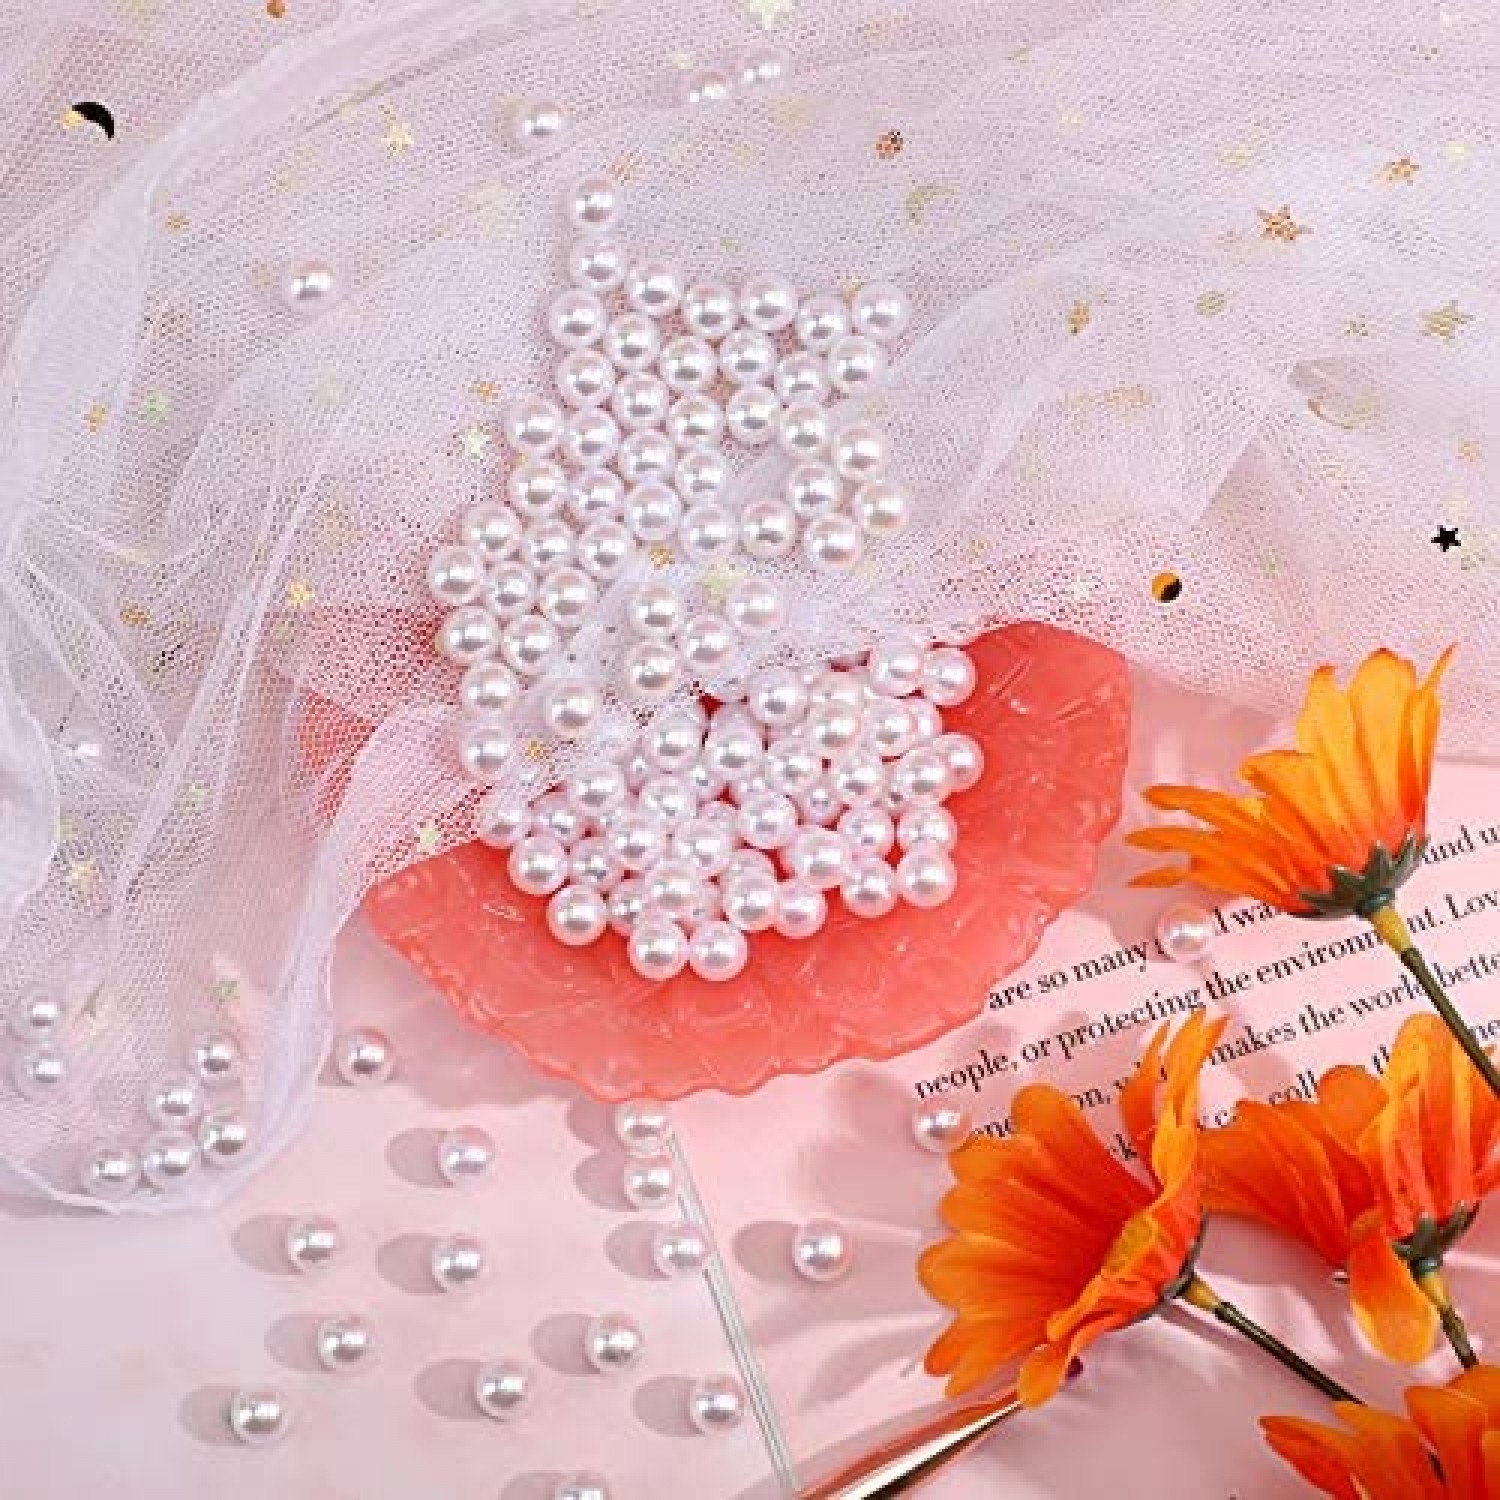 Niziky 500PCS 6mm Crafts No Hole Pearls, White Loose Pearls Beads Without  Holes, Round No Hole Pearls Vase Fillers, Pearls for Crafts, Wedding